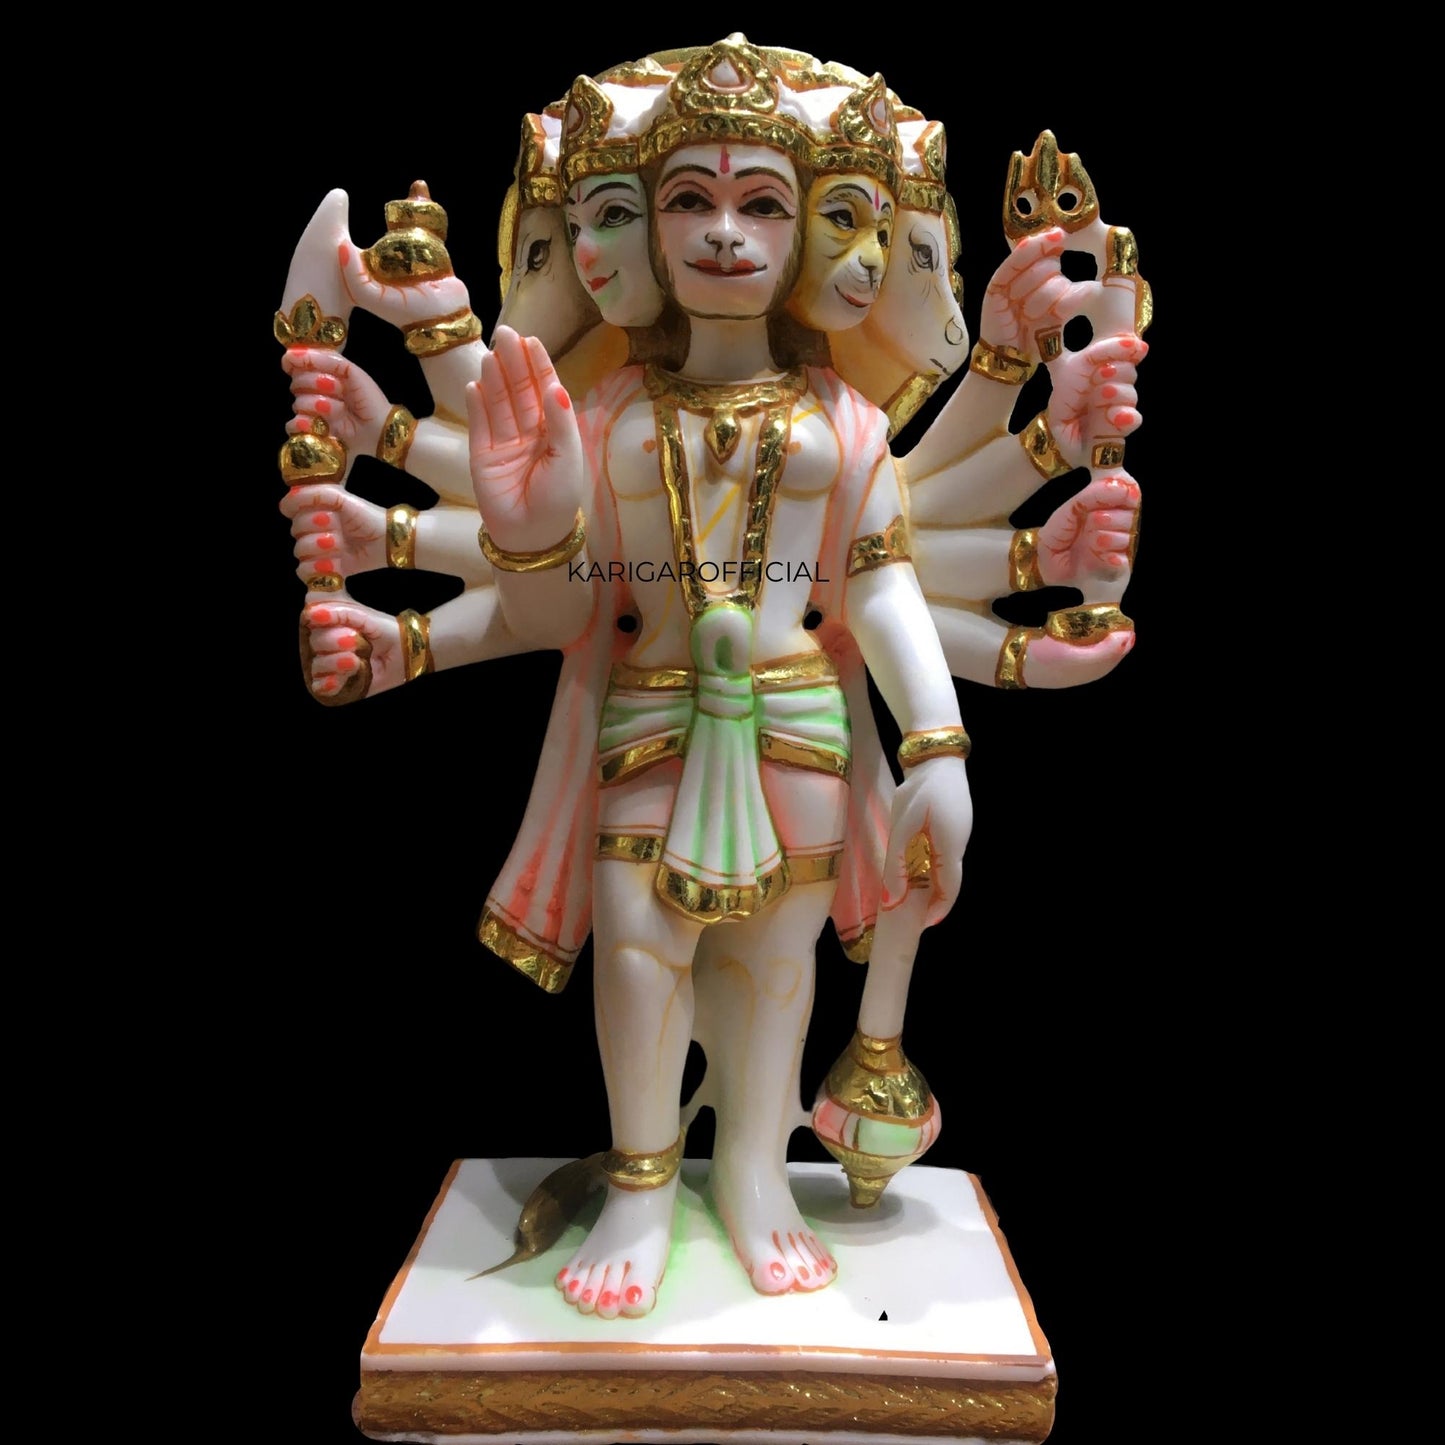 Panchmukhi Hanuman Statue, Multicolor 9 inches Hand Painted Marble Blessing 5 Faces Bajrang Bali Figurine, Powerlifter Hindu Monkey god of Devotion, Strength, Perfect for Small Home Temple Decoration